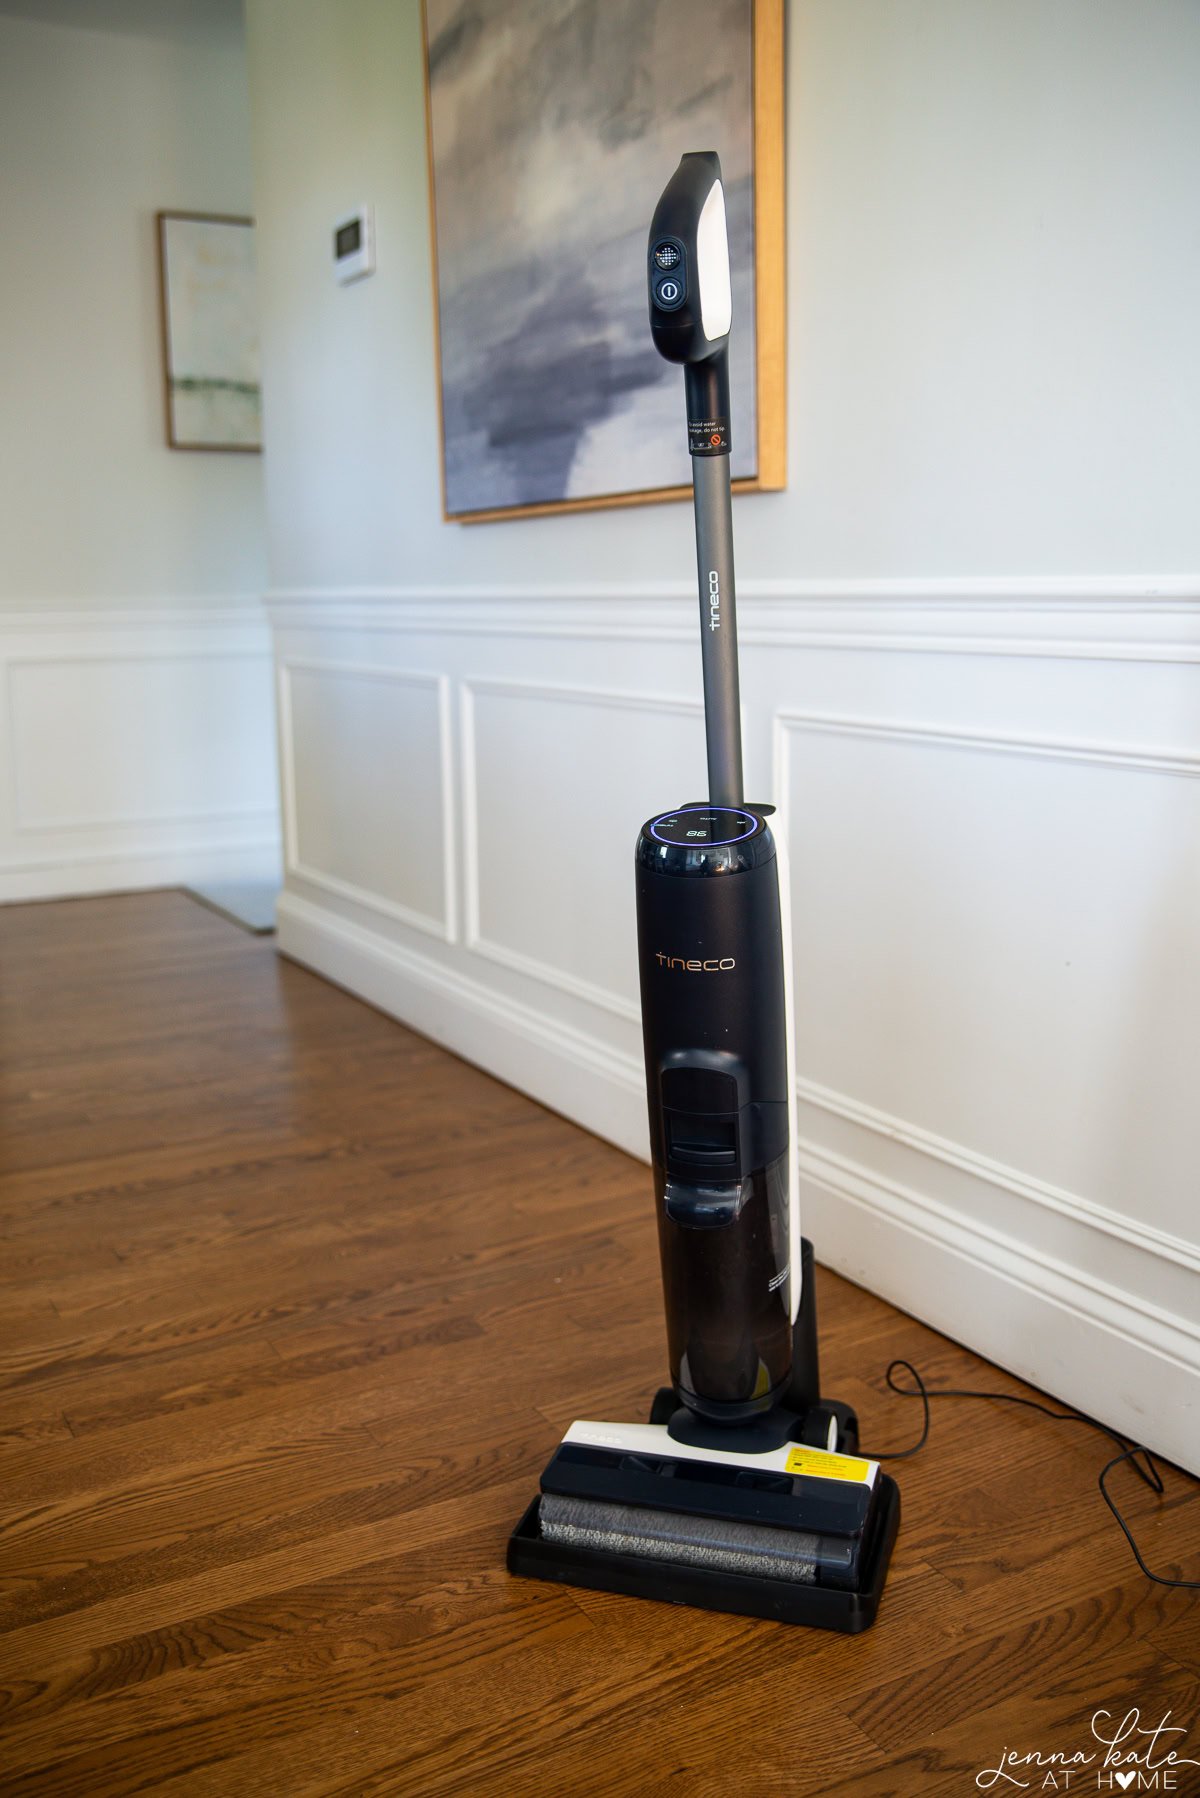 The Best Way To Clean Hardwood Floors (plus everything else I’ve tried over the years)